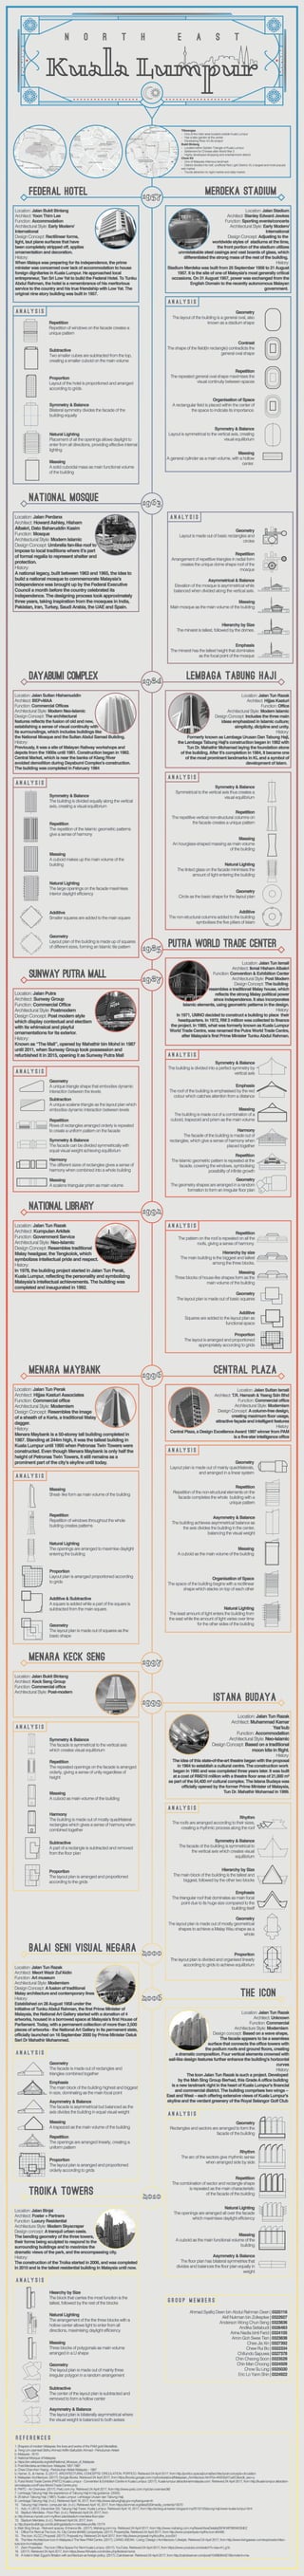 Architectural timeline and analysis 